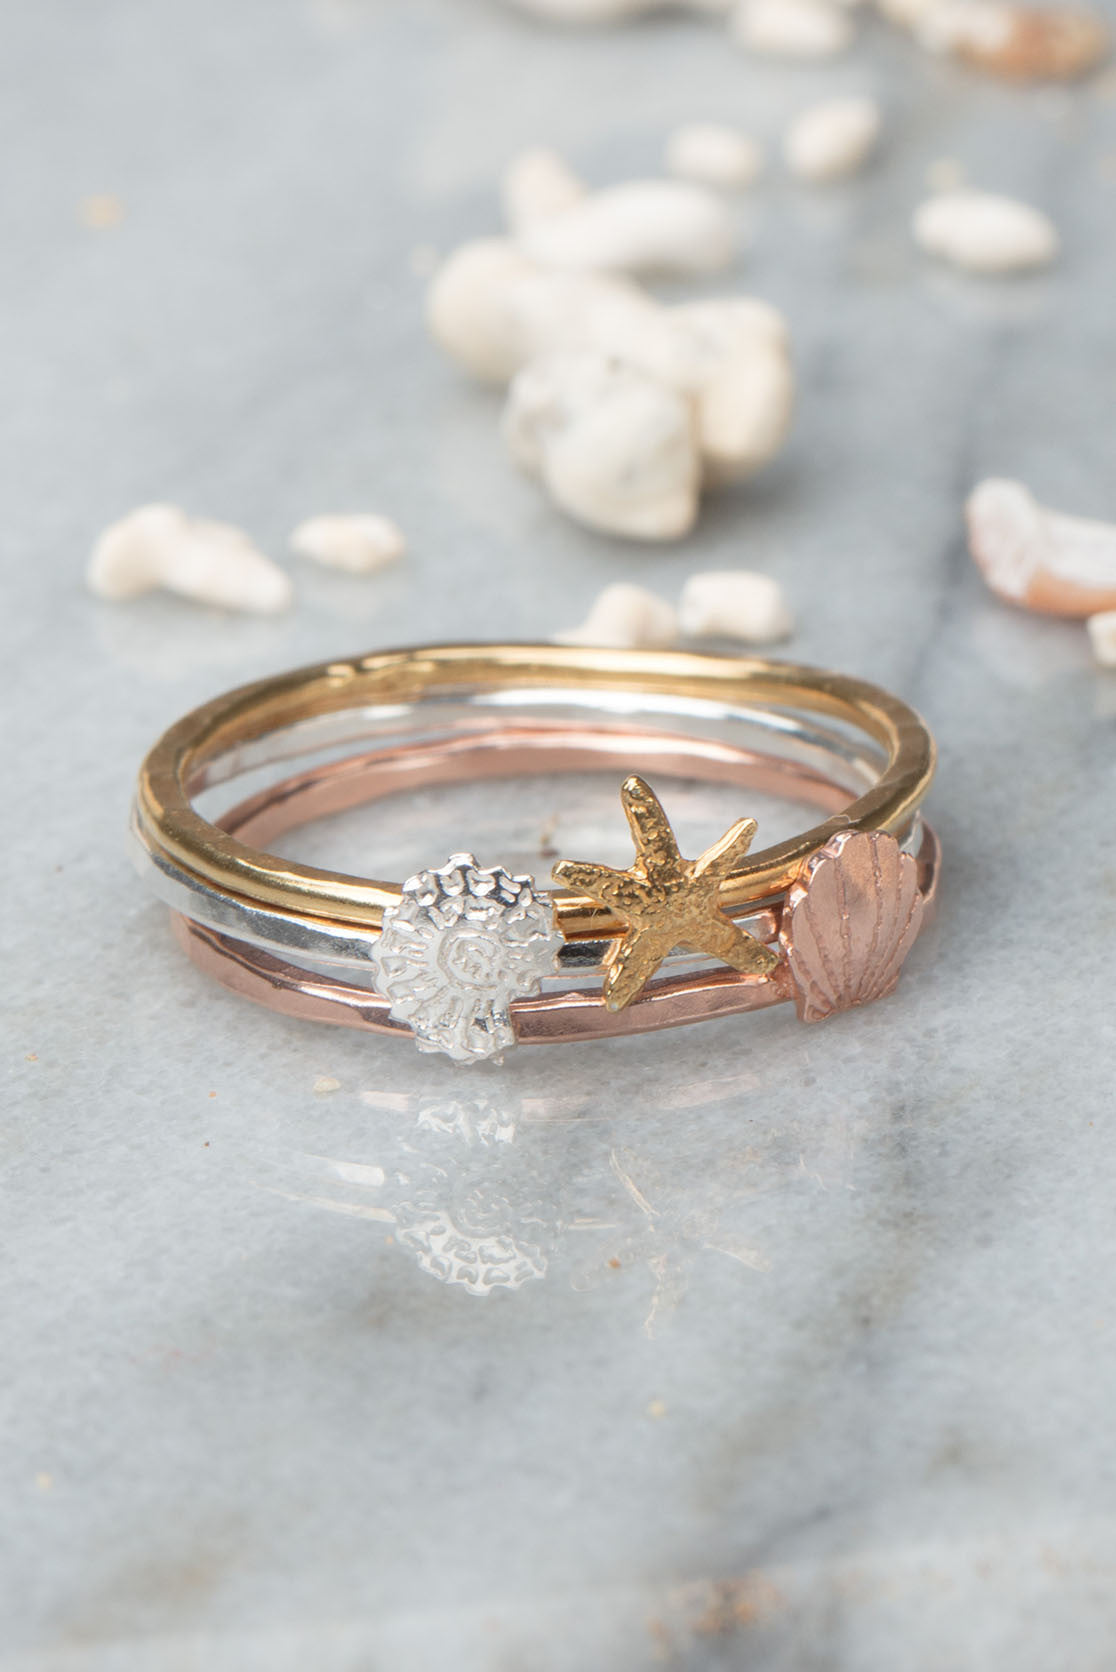 Three Ring Set with gold vermeil starfish ring, a silver nautical ring and a rose gold clamshell ring